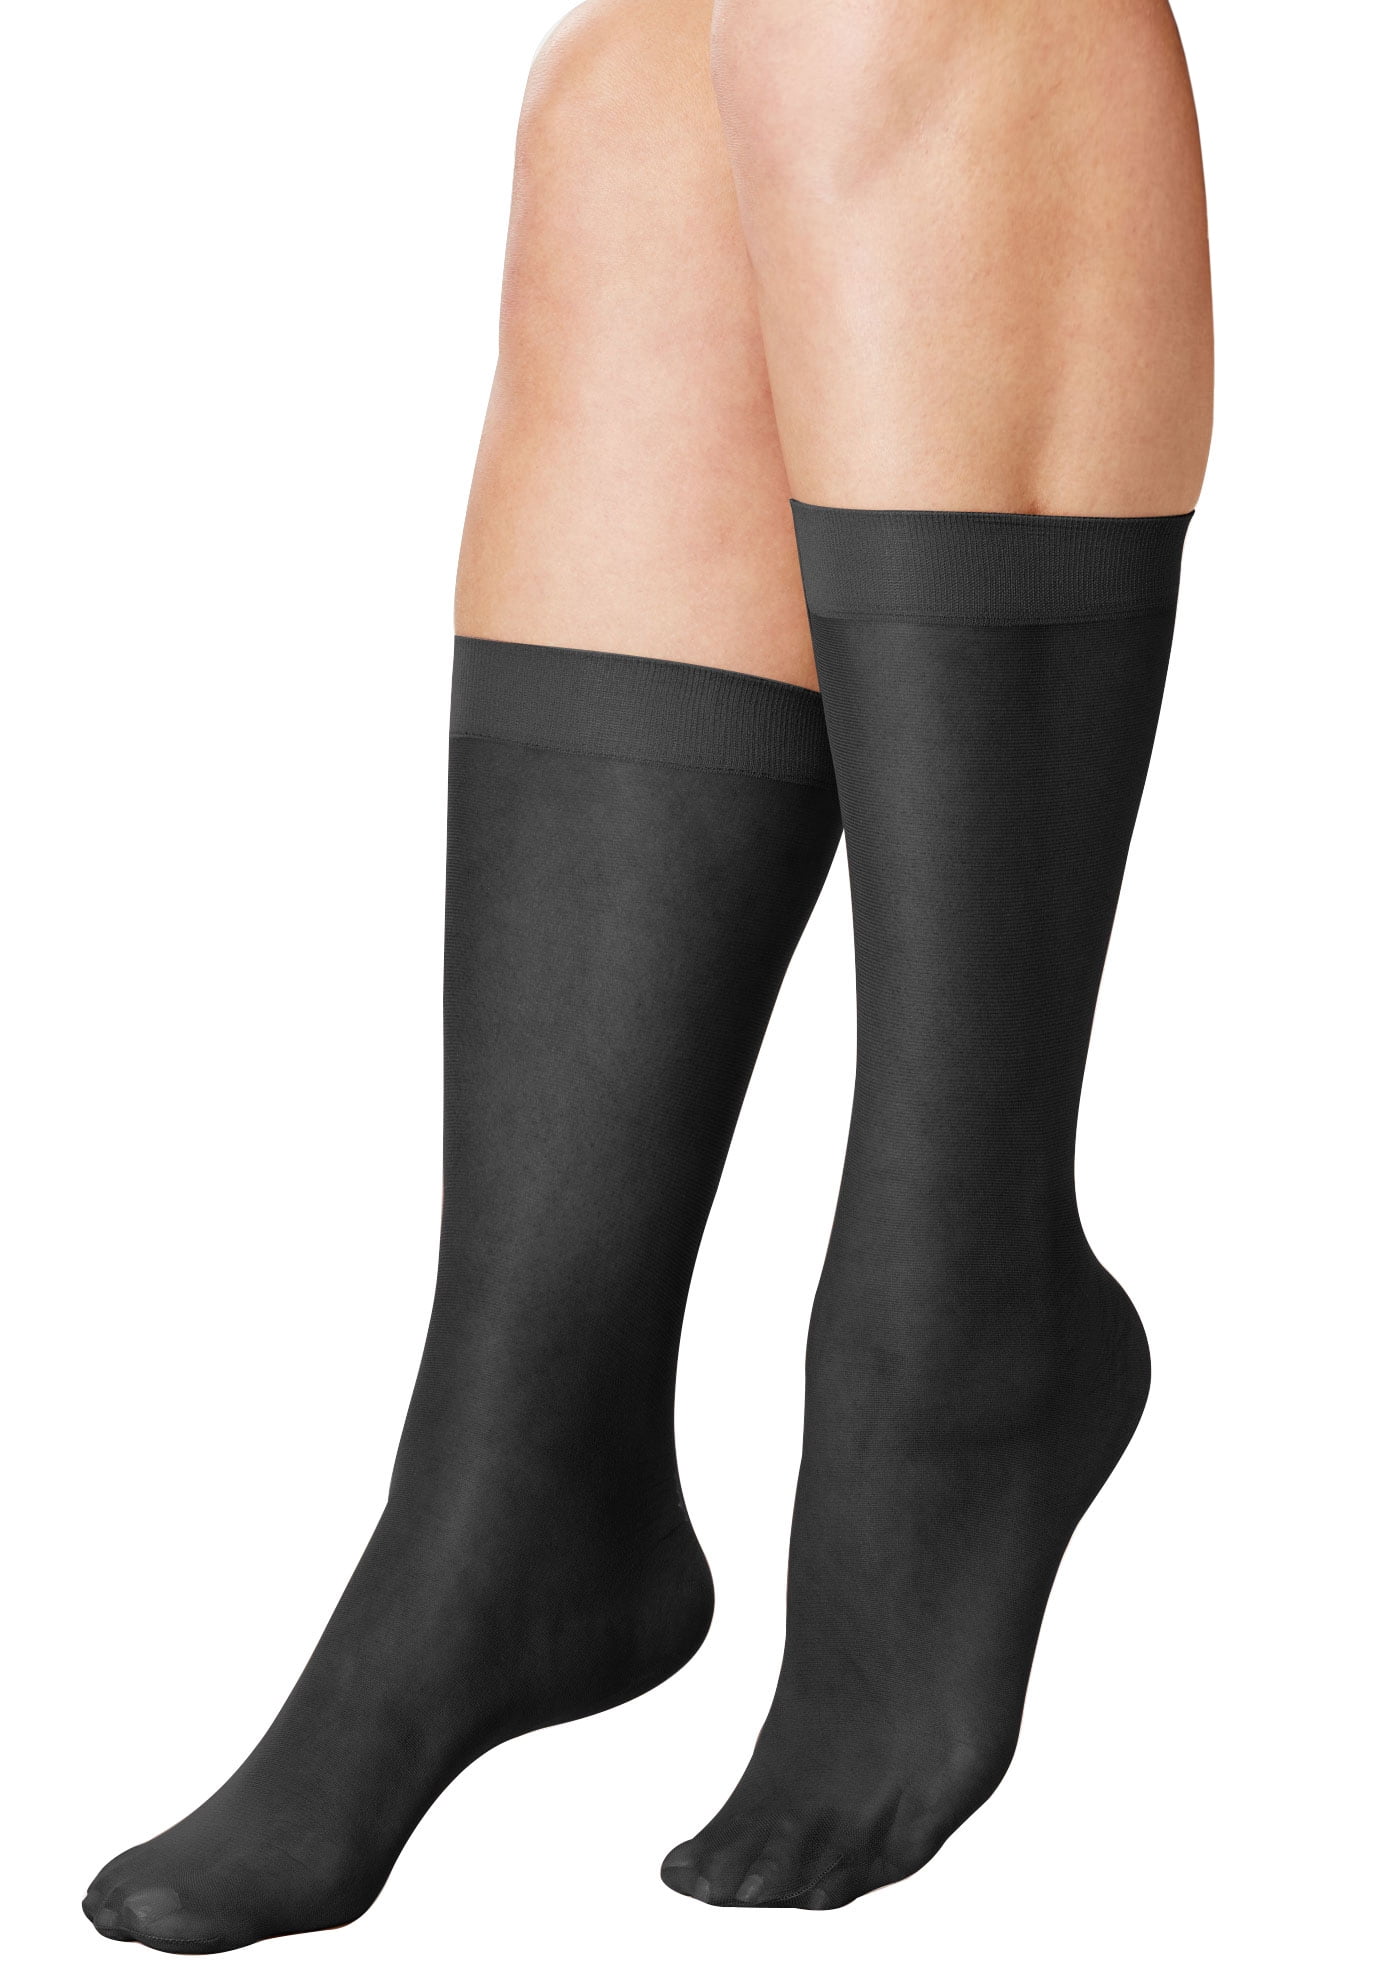 Plus Size Knee High Socks | Hot Sex Picture